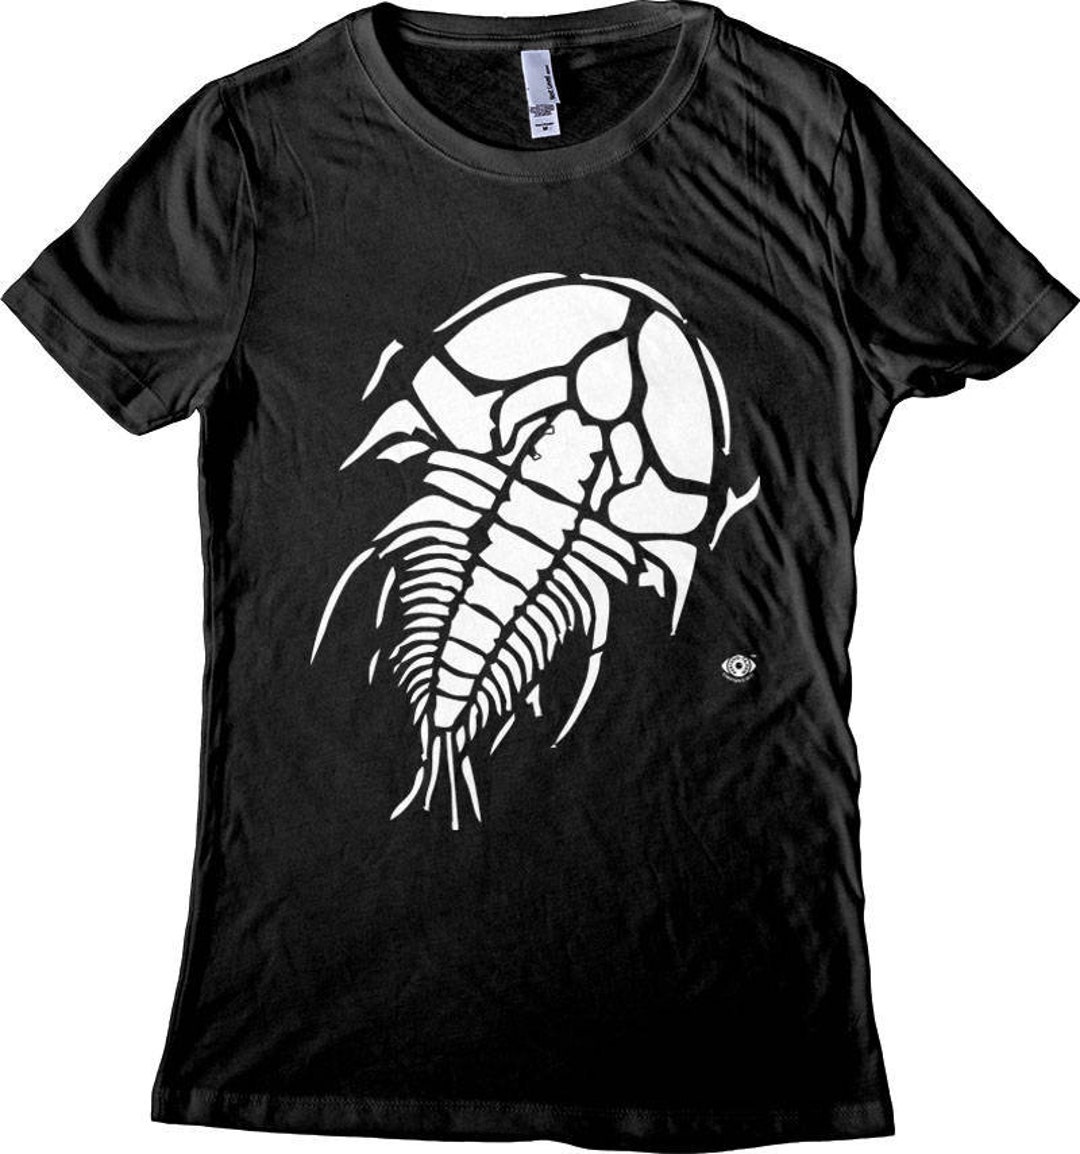 Trilobite Fossil Shirt Paleontology Geology Science Shirt Science Gift ...